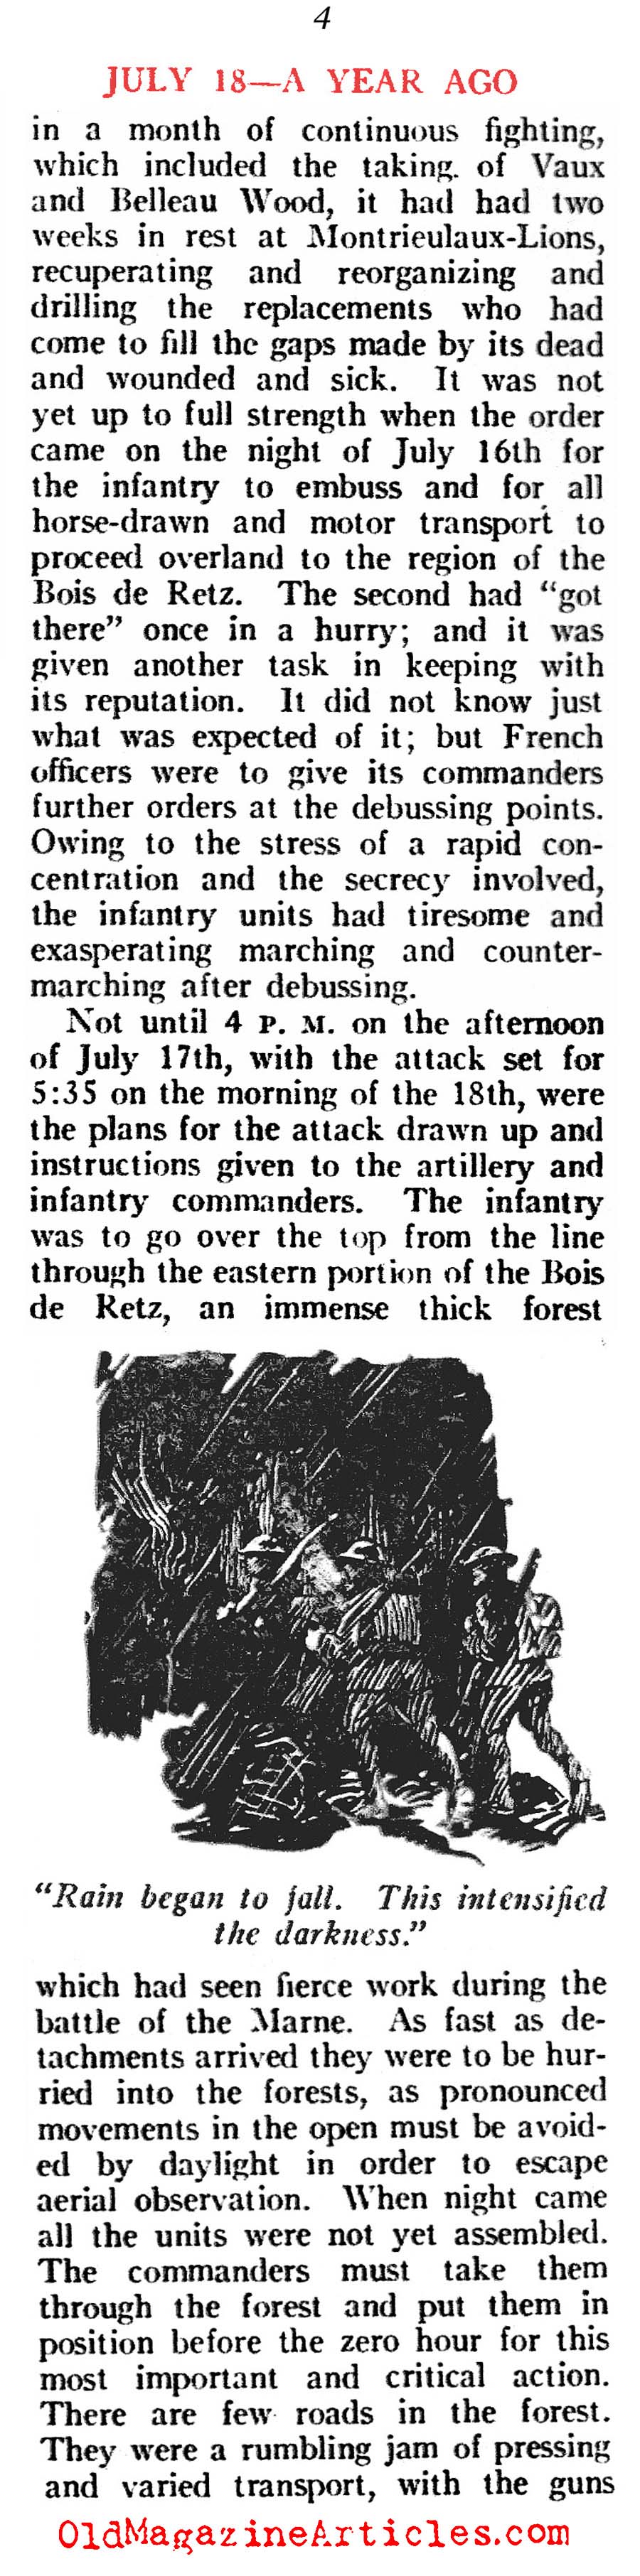 The Summer of 1918, pt. I (American Legion Weekly, 1919)